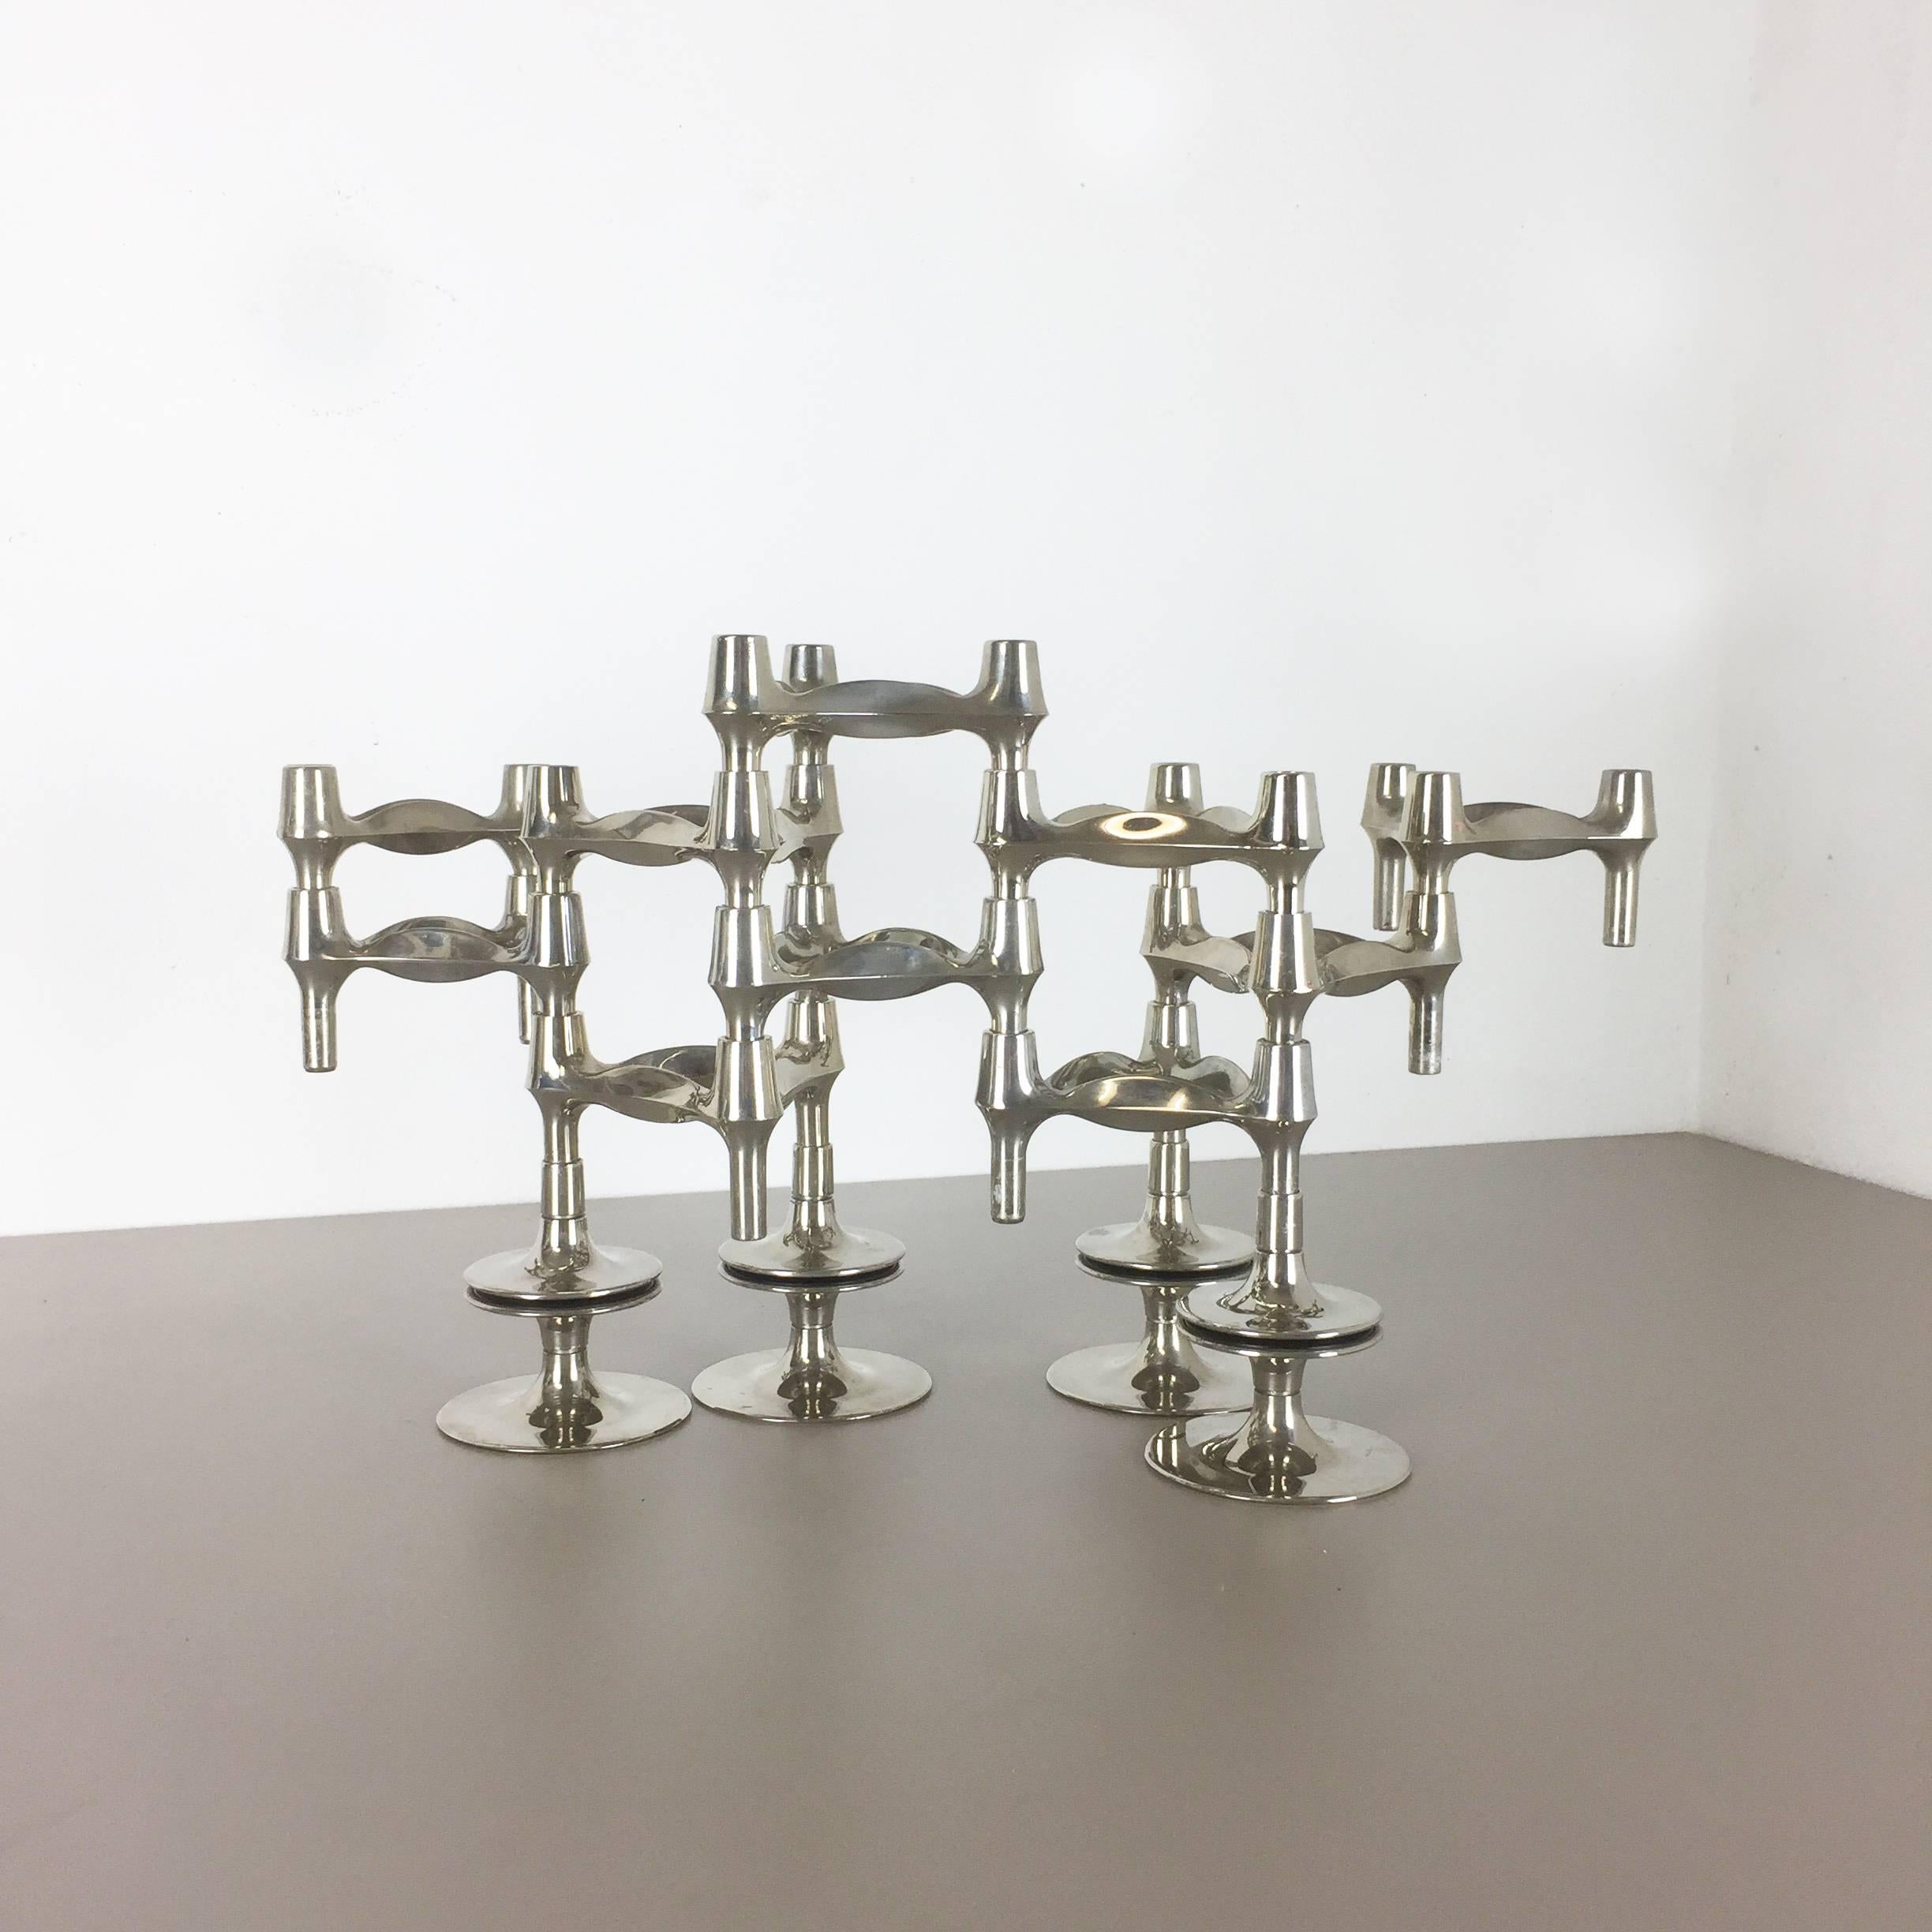 Article:

Ten metal candleholder elements plus four base elements


Producer:

BMF Nagel, Germany


Design:

Caesar Stoffi


This original vintage set of ten metal candleholders plus four base elements, was produced in the 1970s in